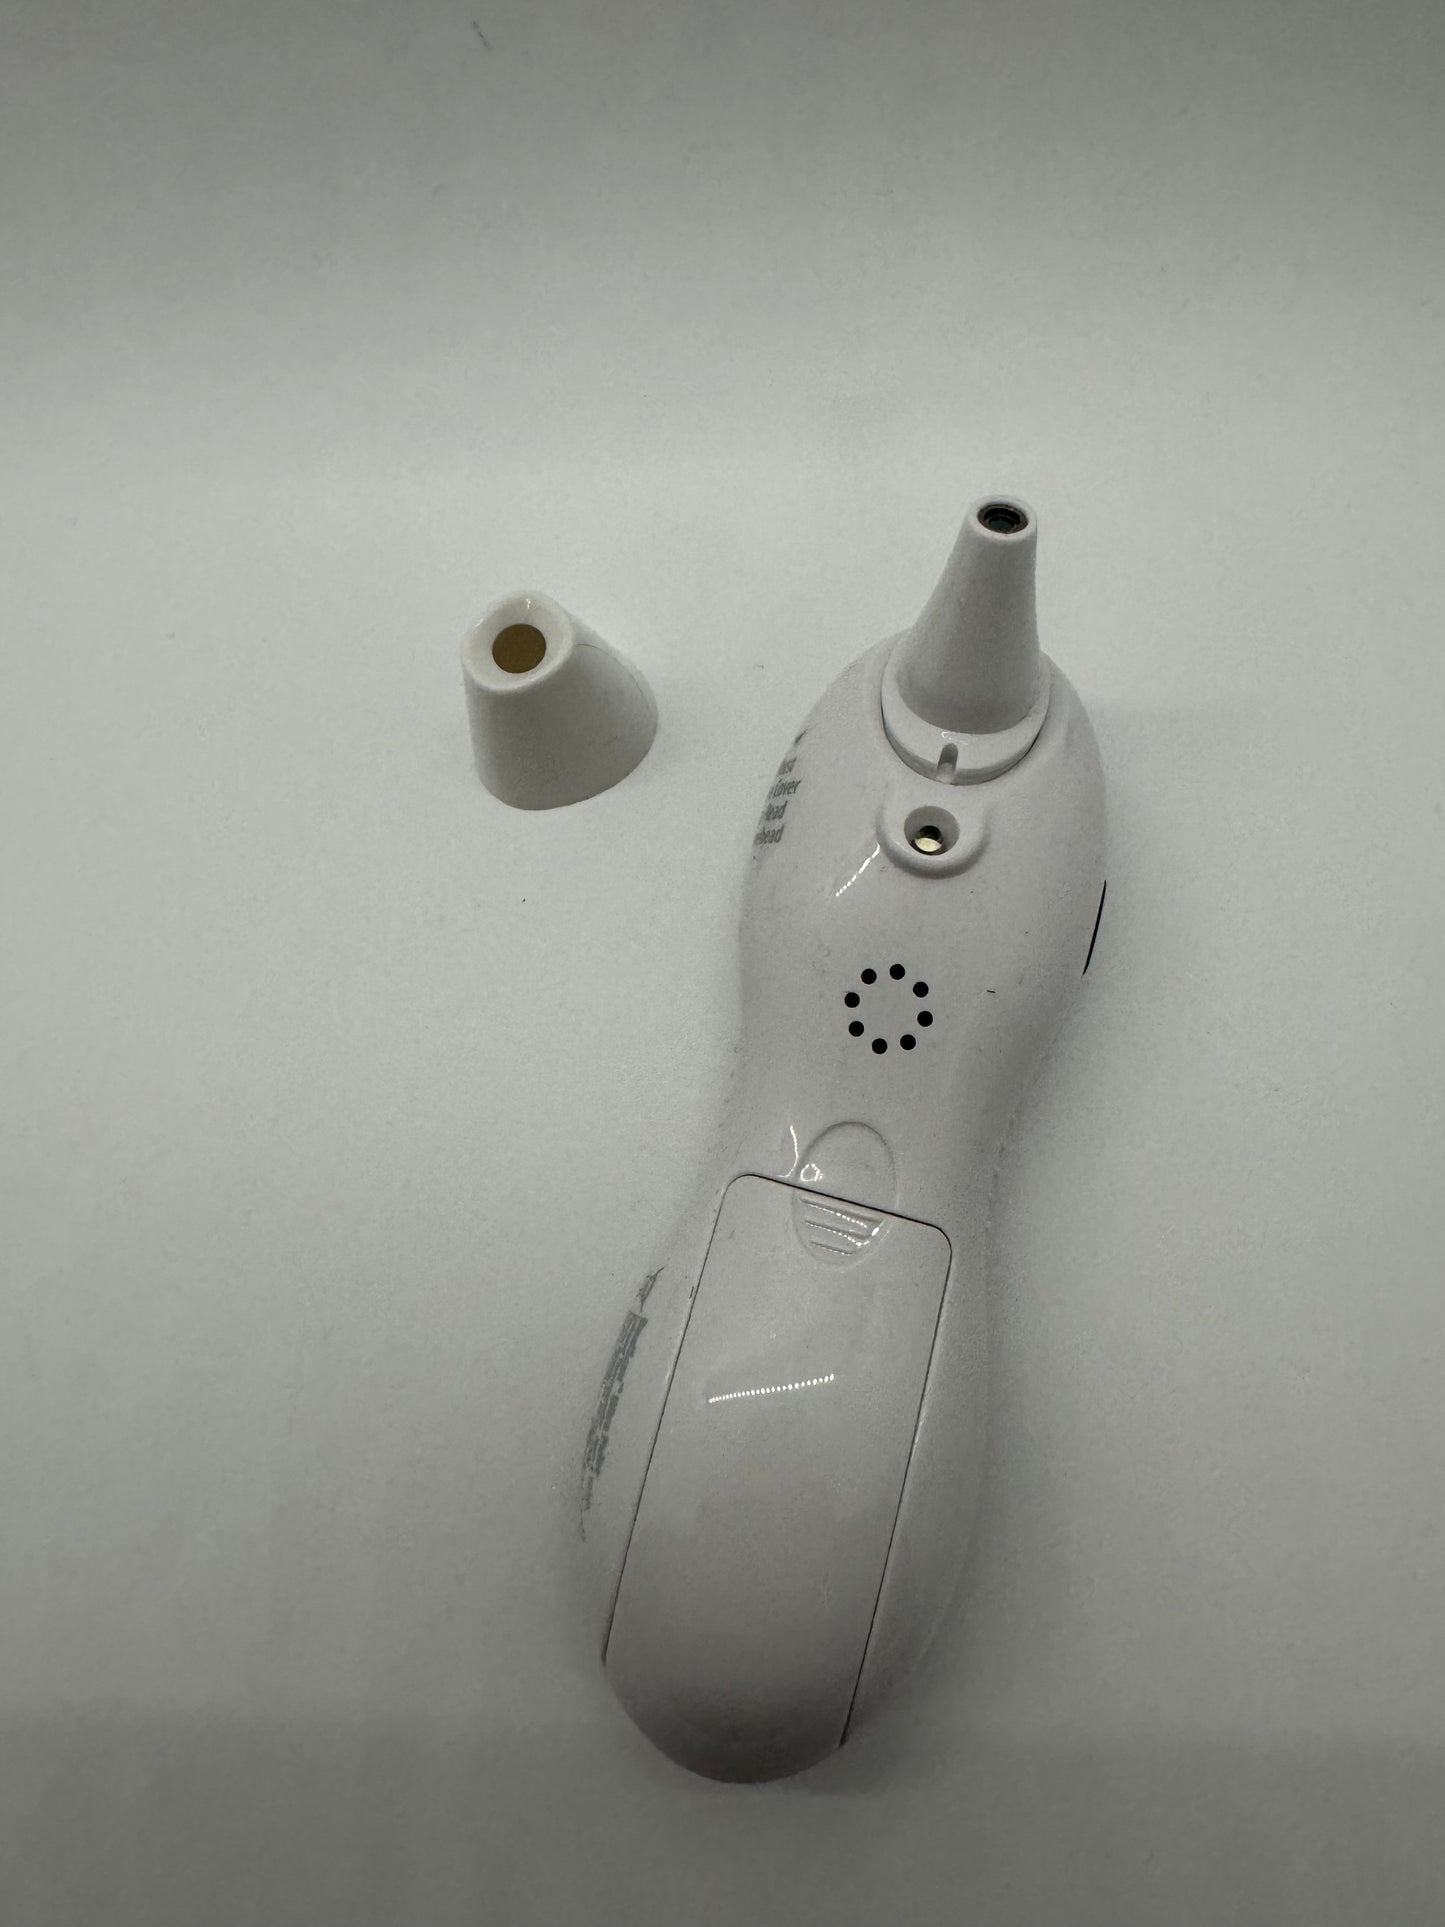 The picture shows two objects on a white background. One object is a small white cap or lid, which is cylindrical in shape with a hollow center. The other object appears to be a white electronic device, possibly a thermometer. The device has a narrow, elongated top with a small opening, similar to the mouth of a bottle. The body of the device is somewhat oval in shape with a clear plastic section in the middle that might be a display screen. There are also small holes near the top of the device, w